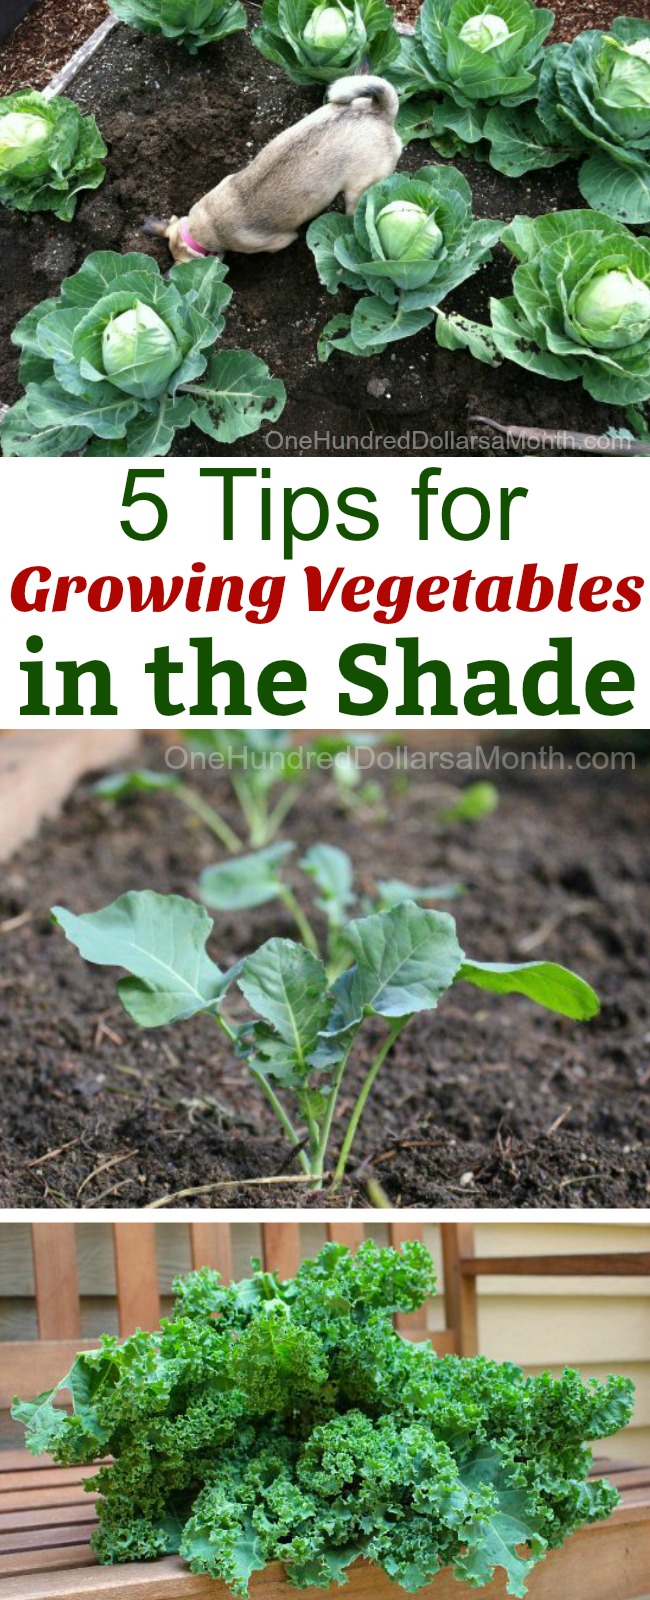 5 Tips for Growing Vegetables in the Shade